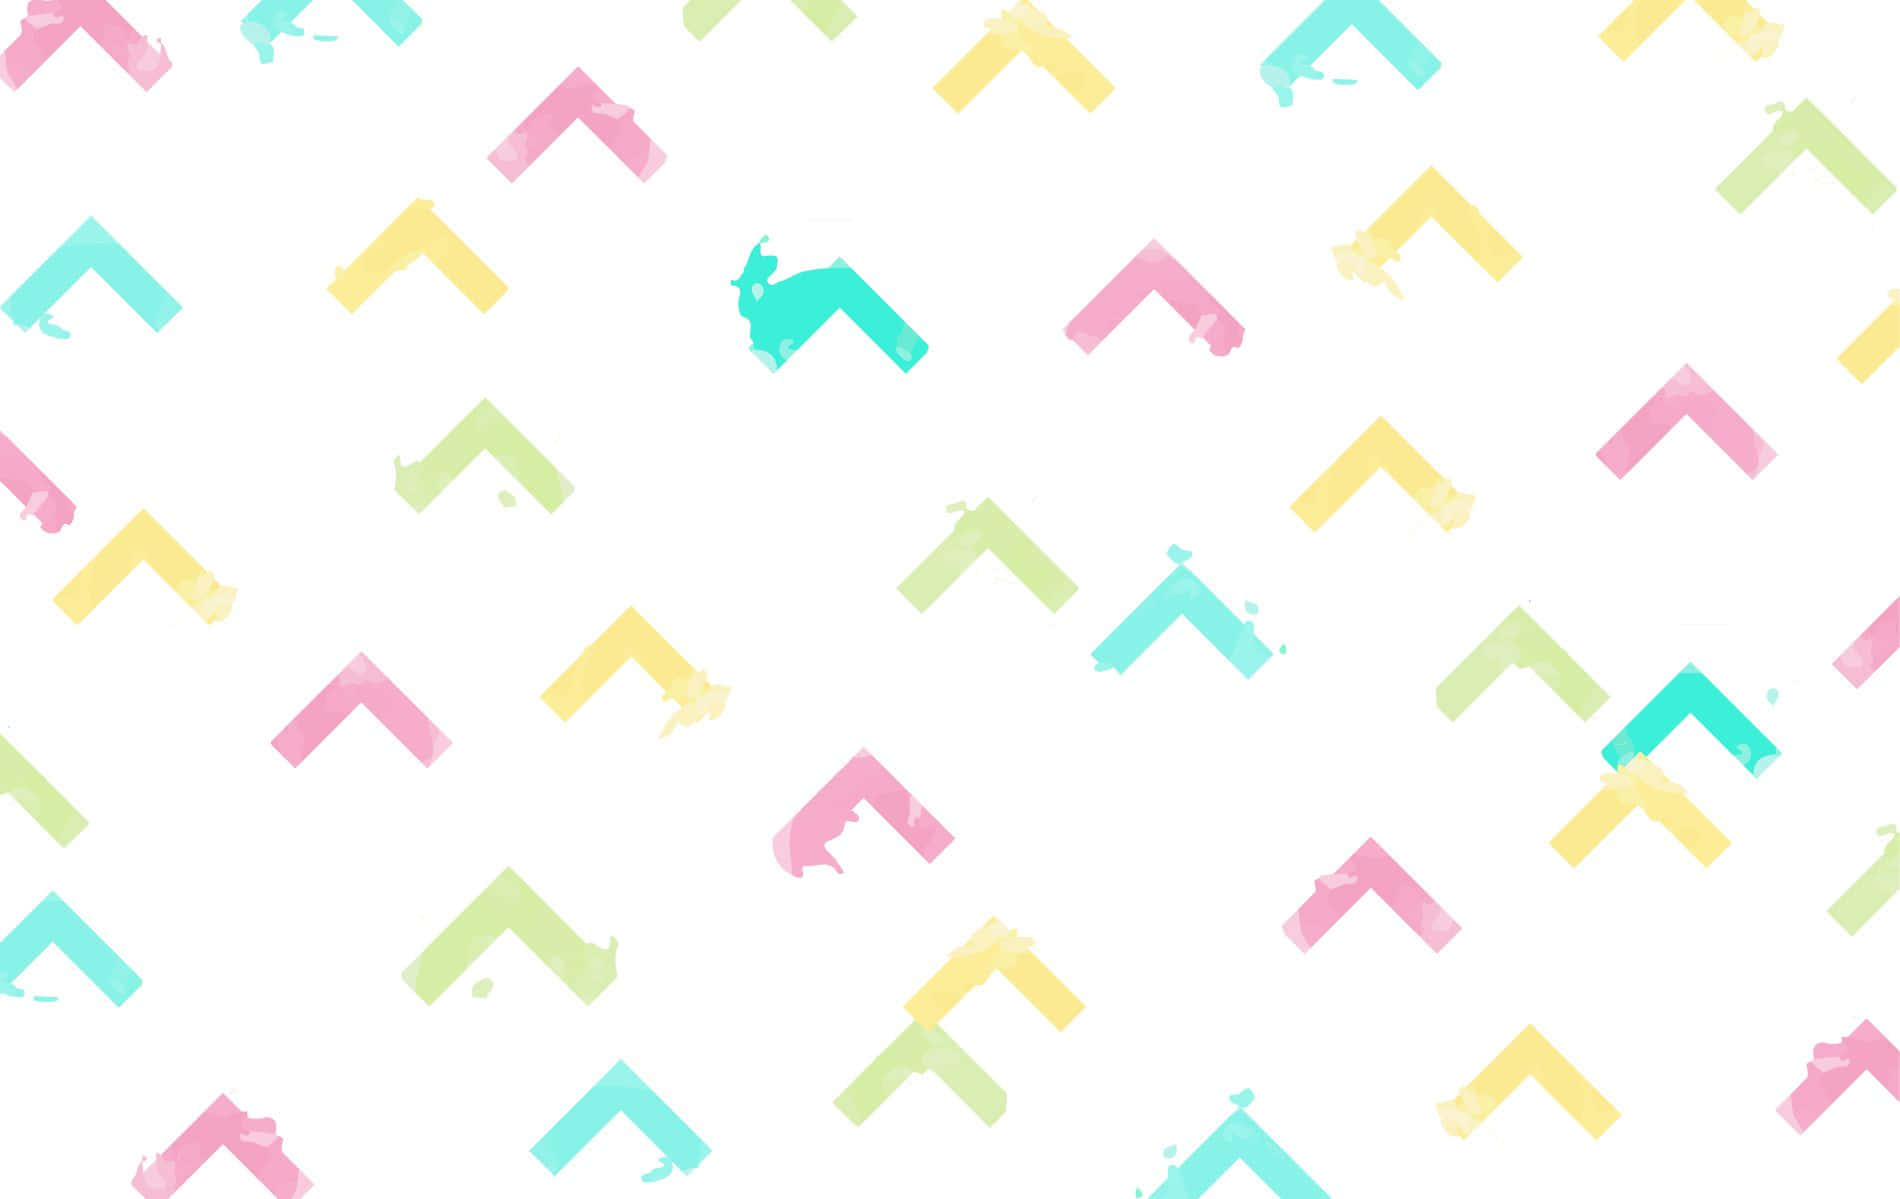 Spruce Up Your Desktop with this Colorful Cute Pastel Background